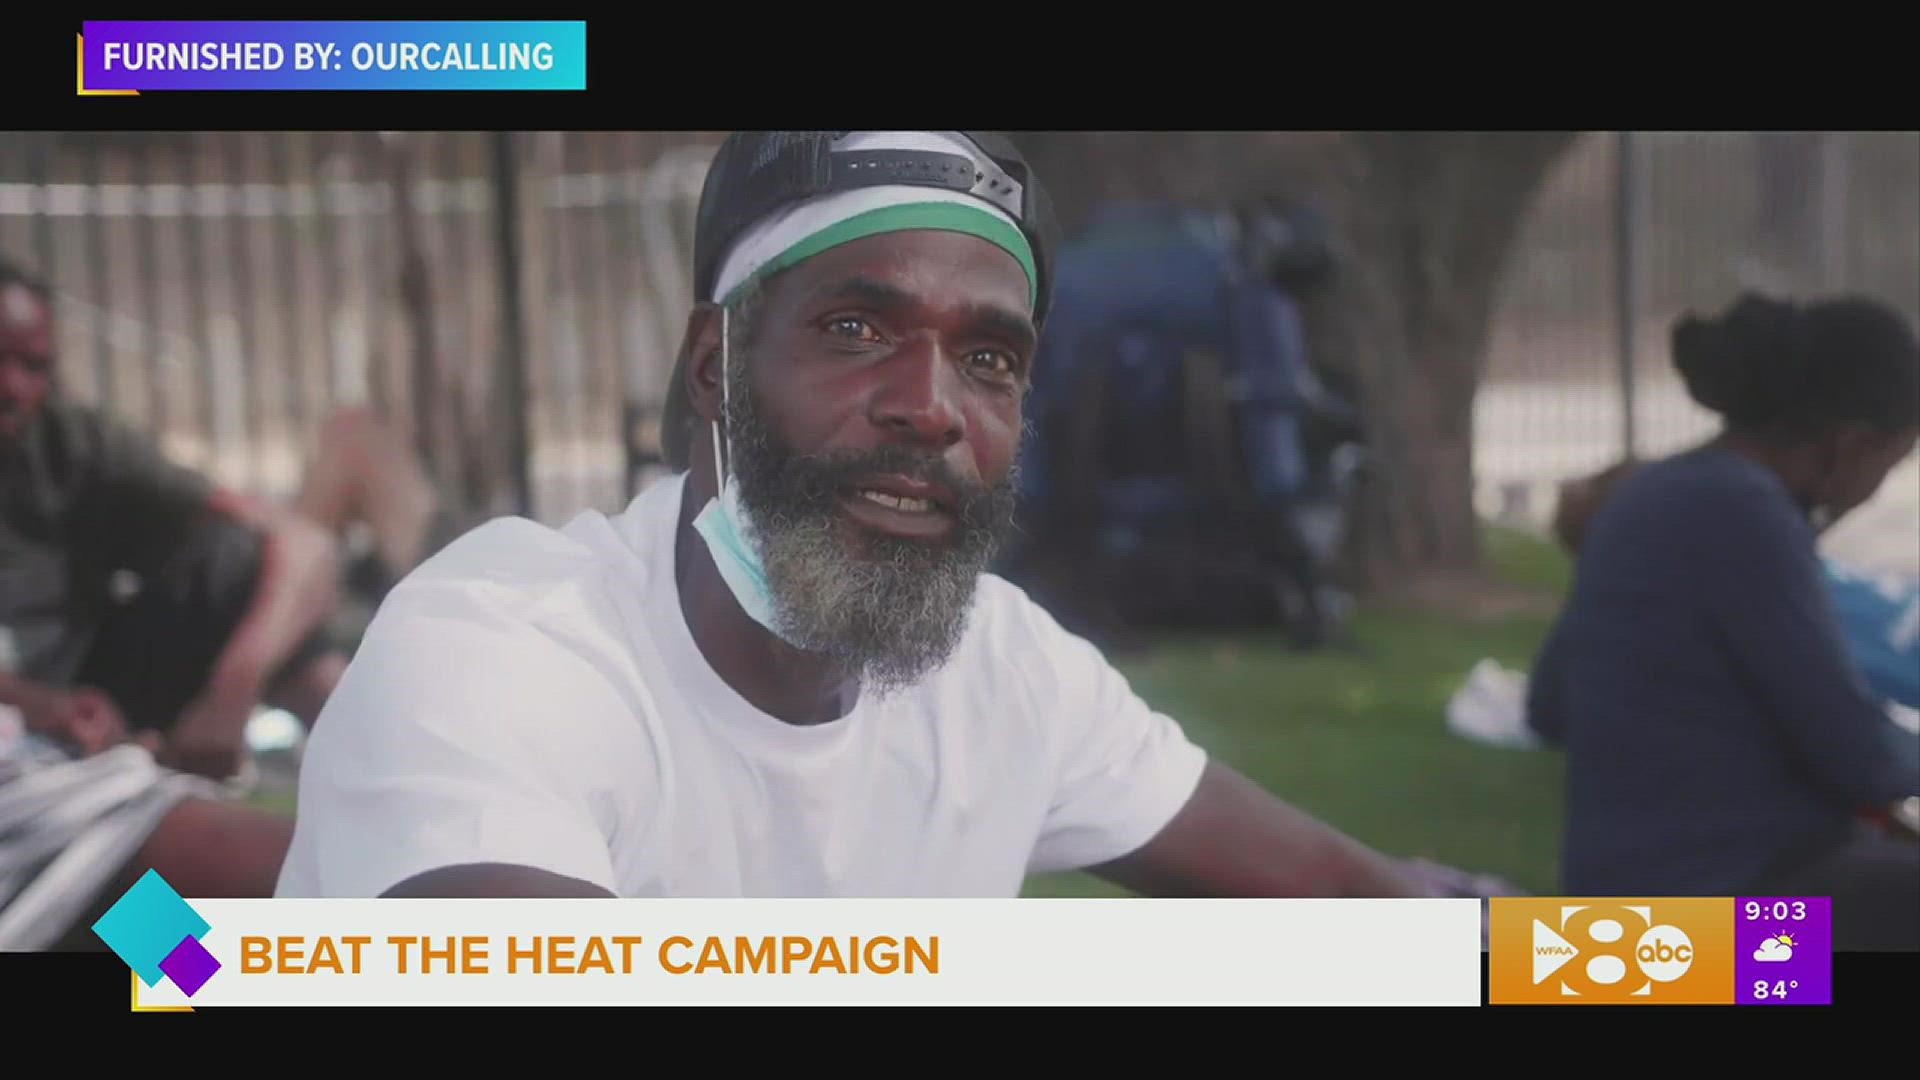 OurCalling CEO and Founder Wayne Walker join us with more on its Beat The Heat Campaign and how you can help.